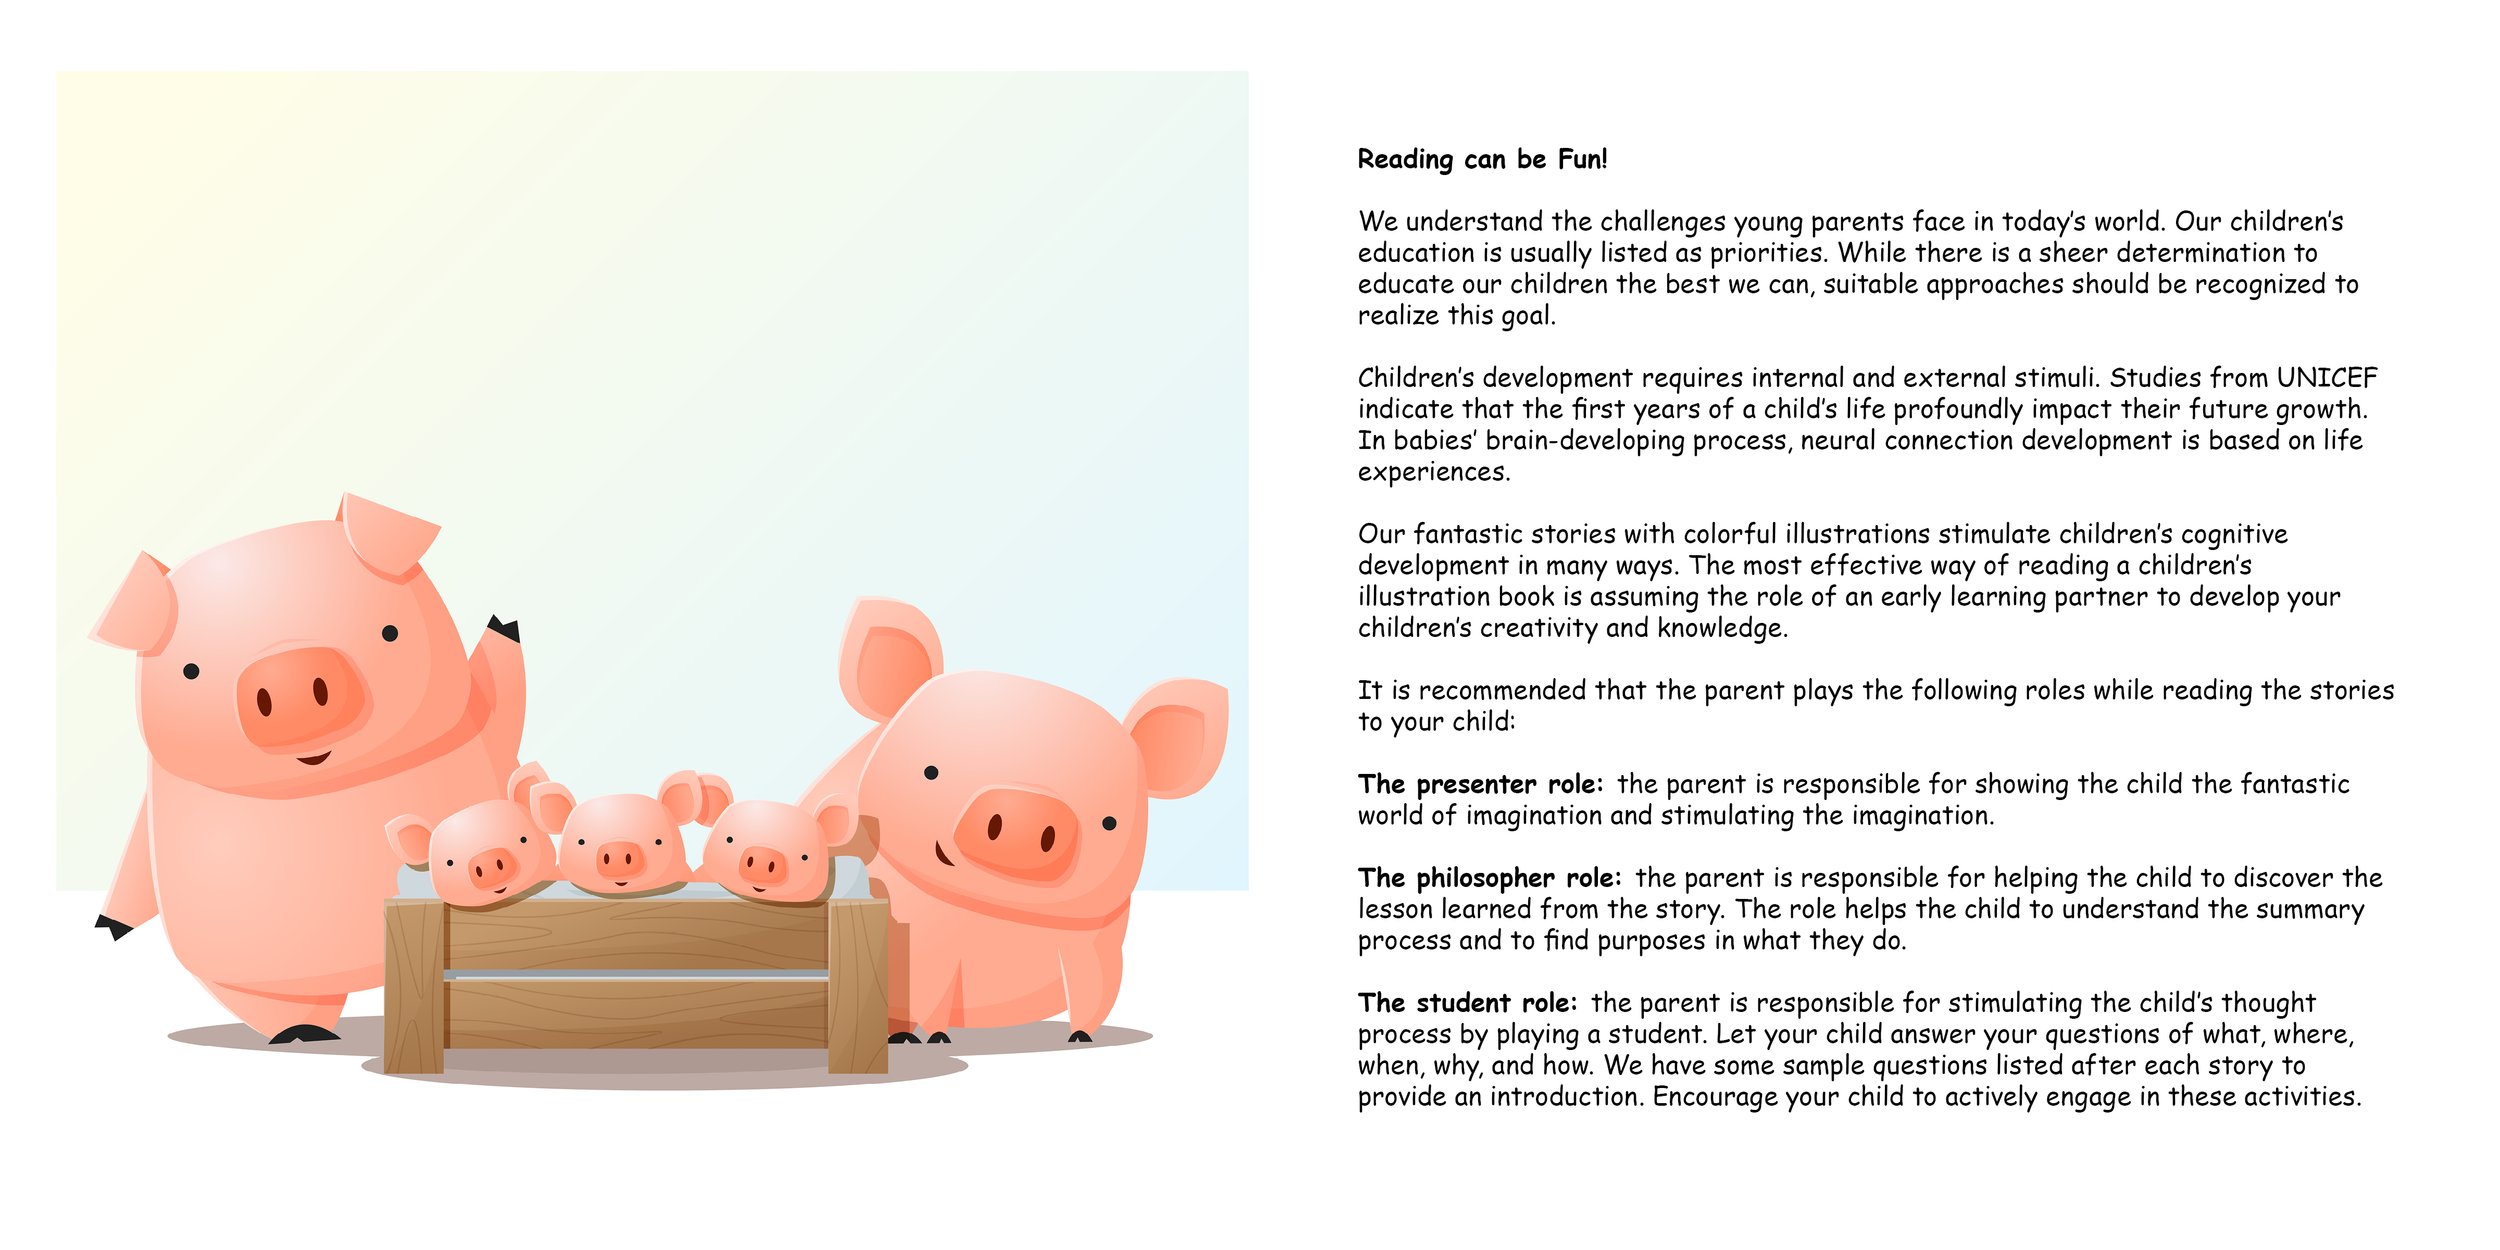 Everything about Pigs4.jpg